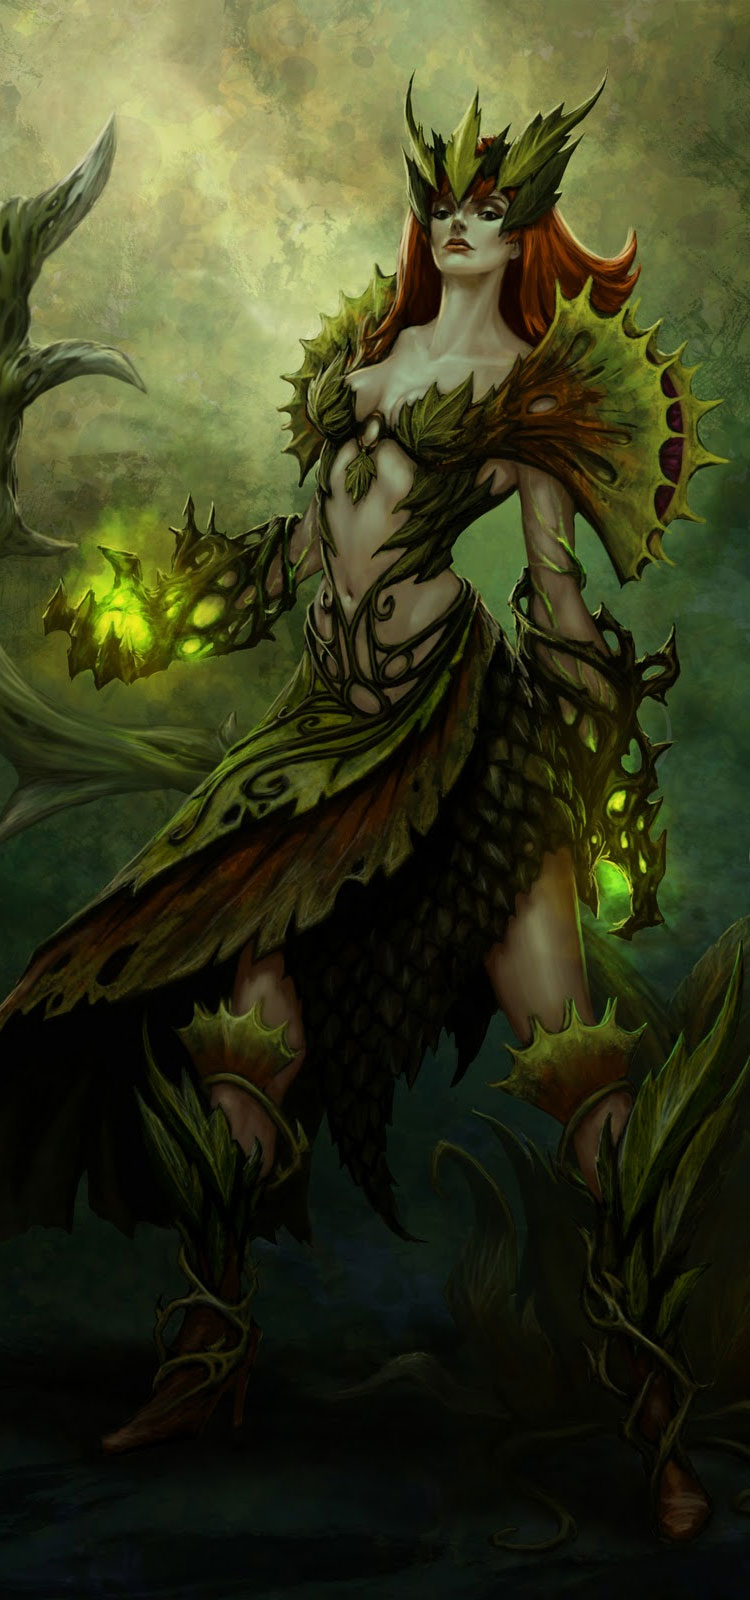 Game Feature - Heroes of Newerth Concept Art